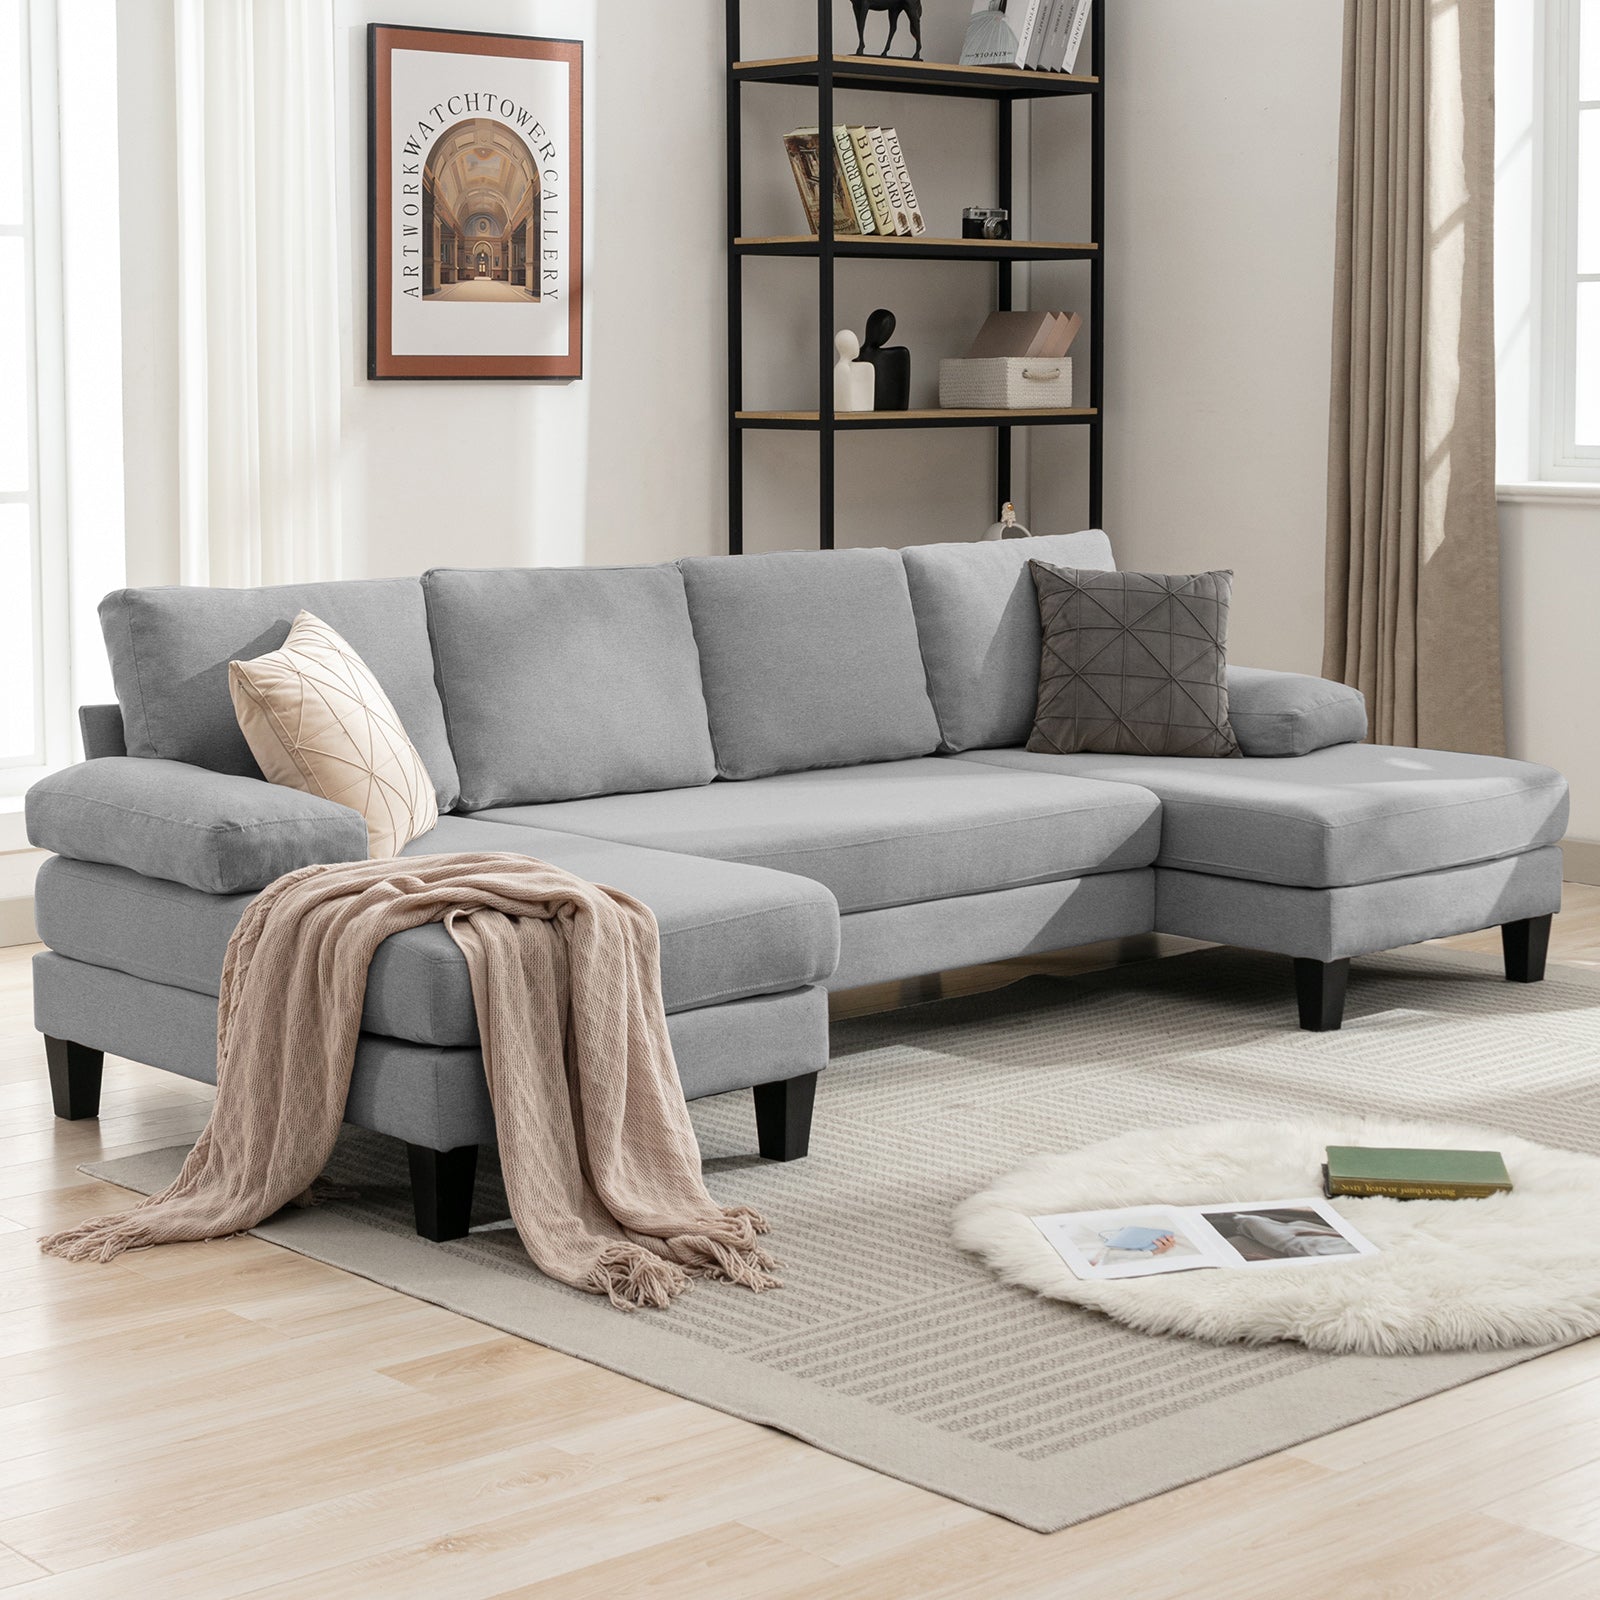 Mjkone U Shaped Sectional Sofa, 4-Seat Modular Sofa, Living Room Modern Couch with Chaise